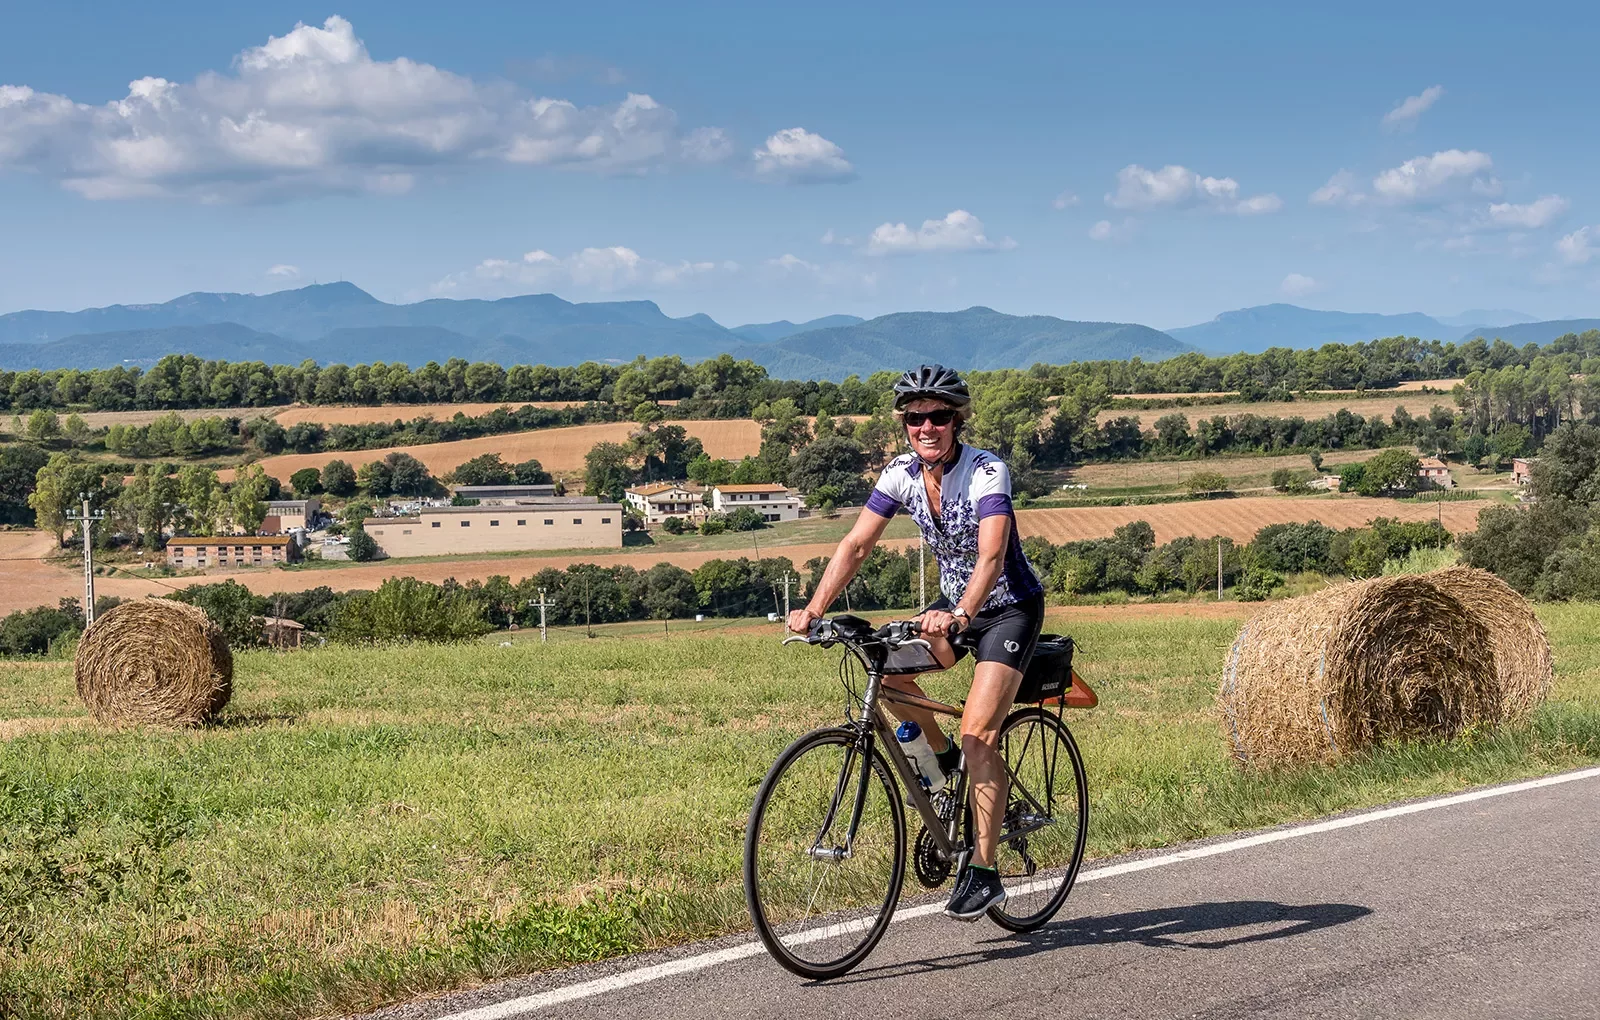 Guest cycling past farmland, hay bales, hilly vista behind her.